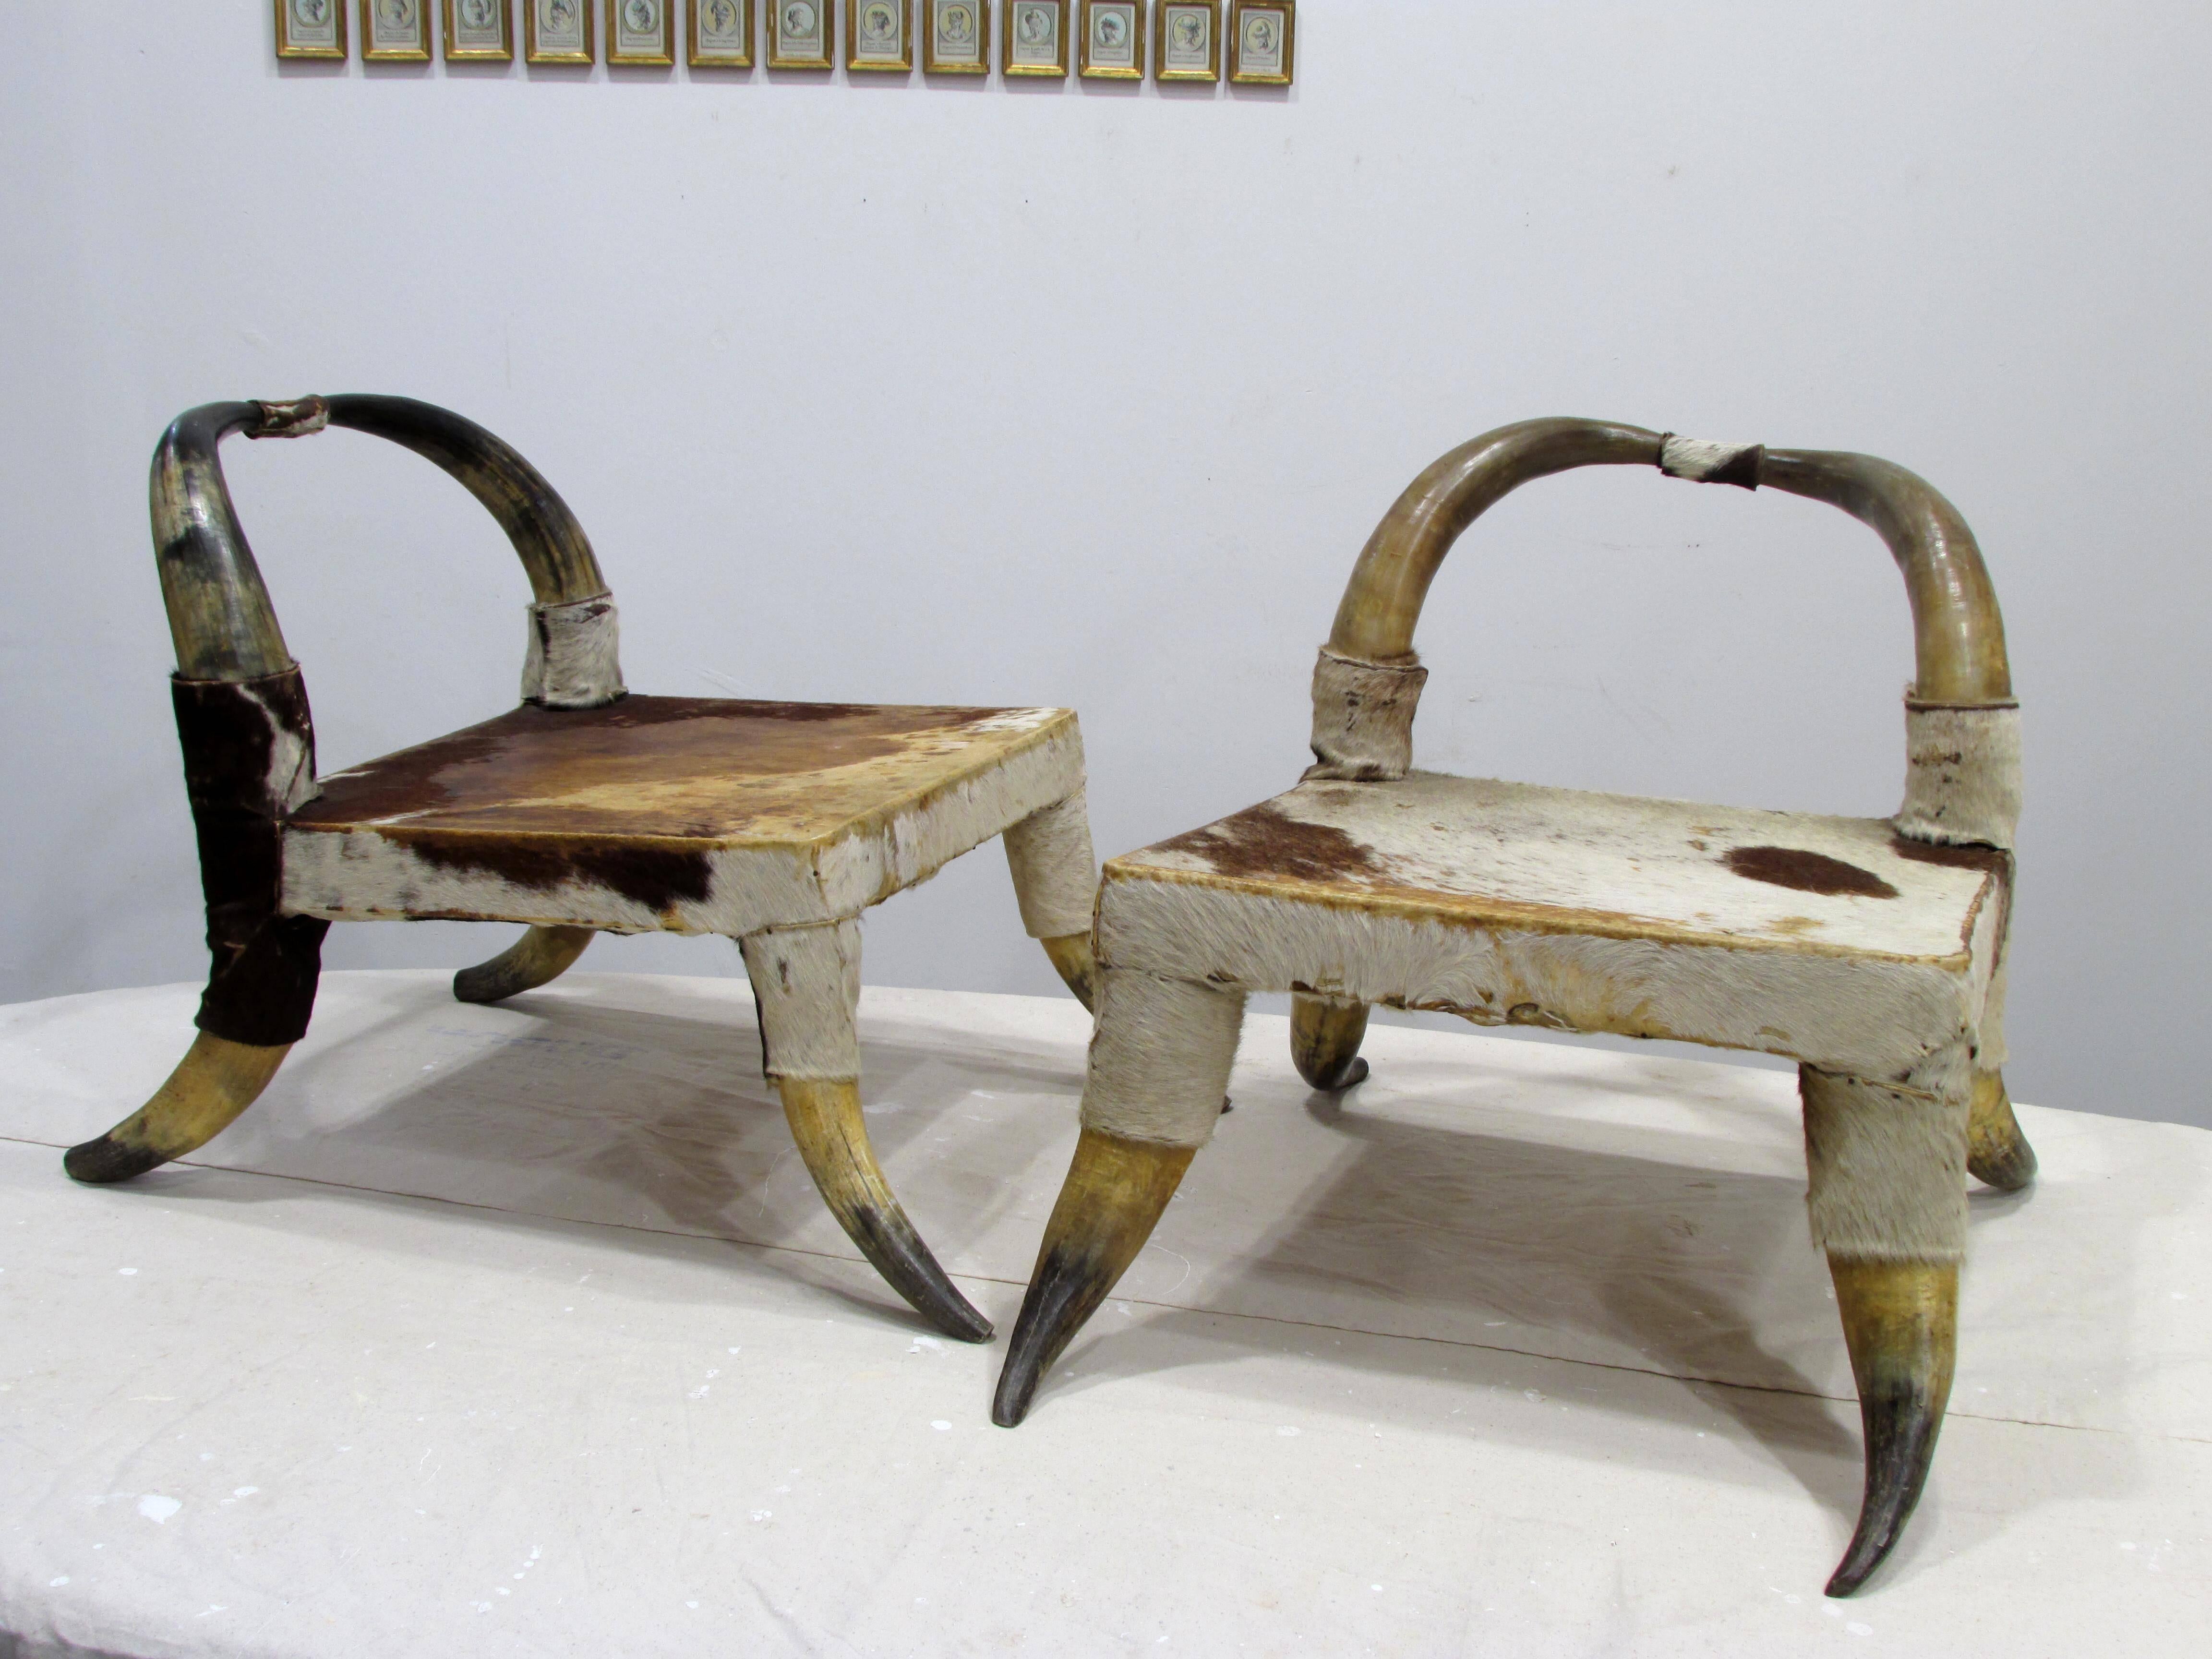 Beautiful and simple pair of low chairs made from cow horn and hide 